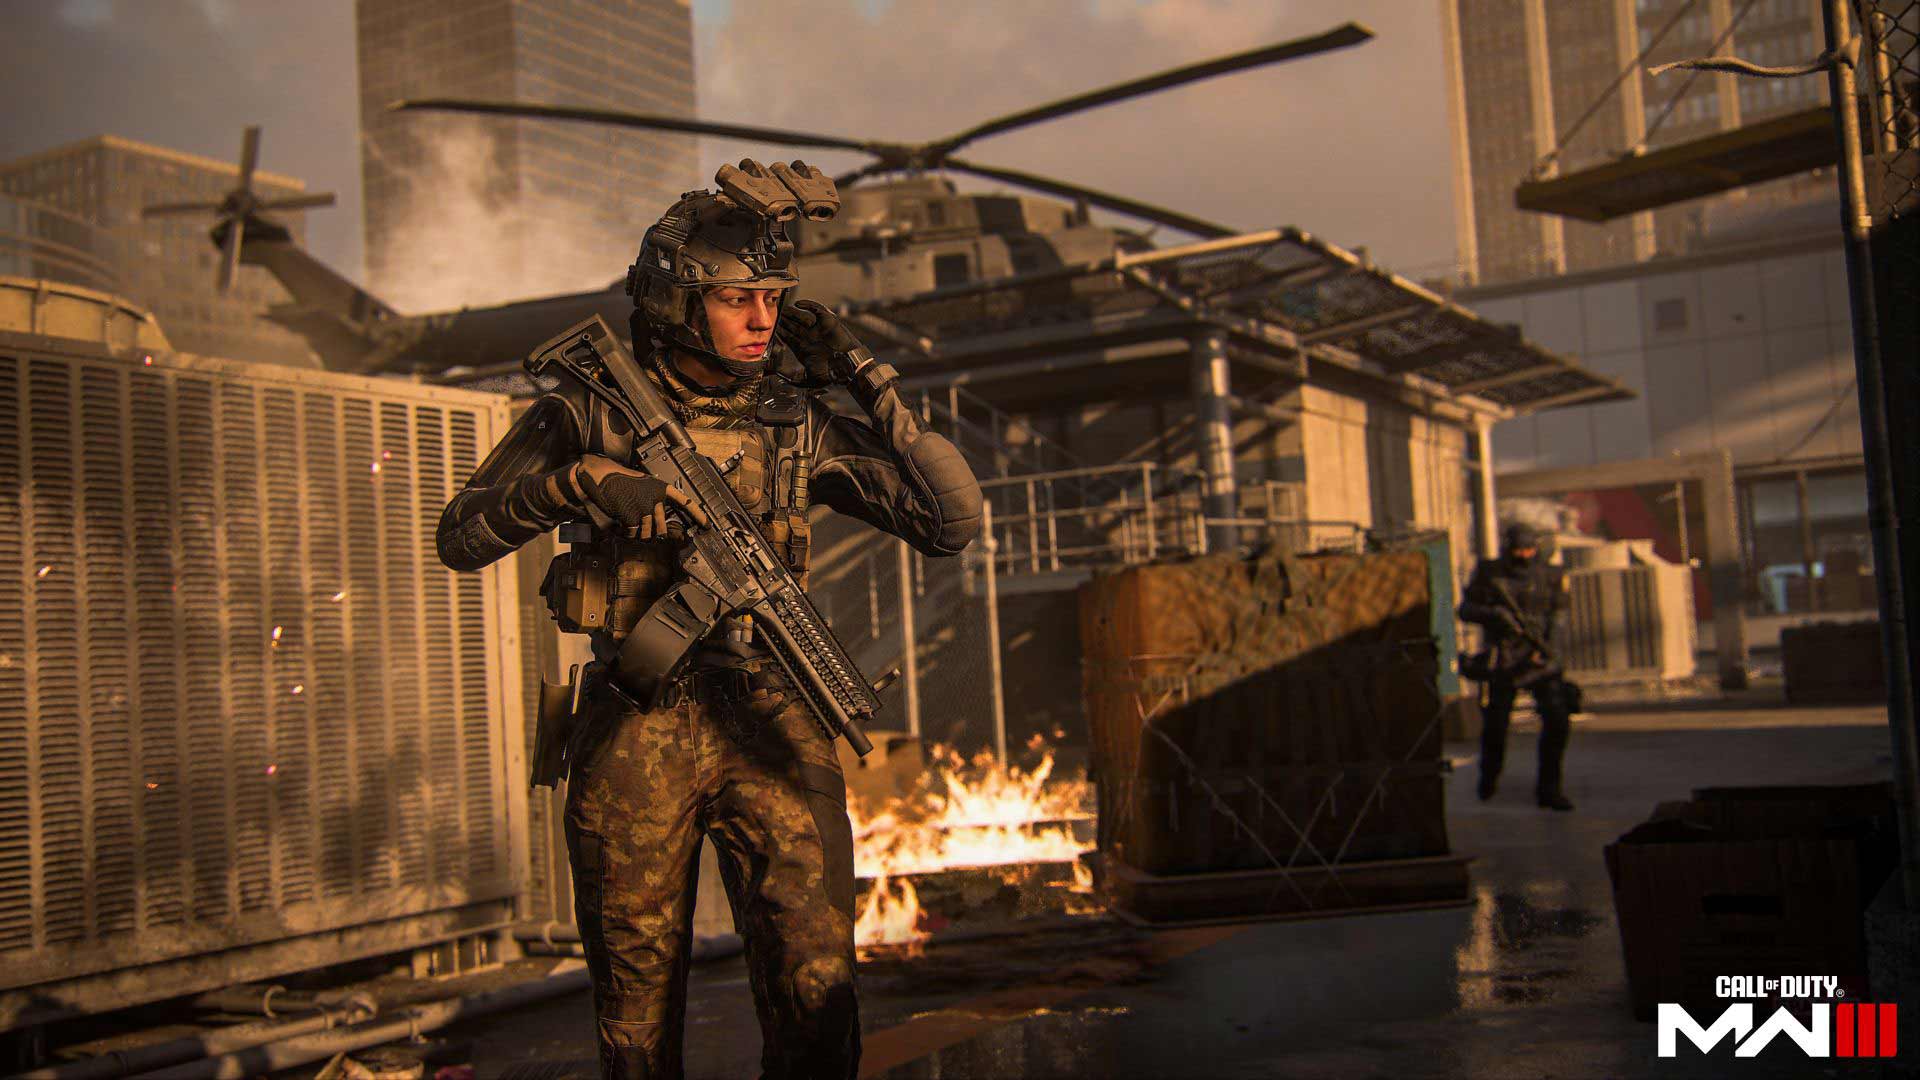 Call of Duty: Modern Warfare III will be available on Game Pass starting tomorrow